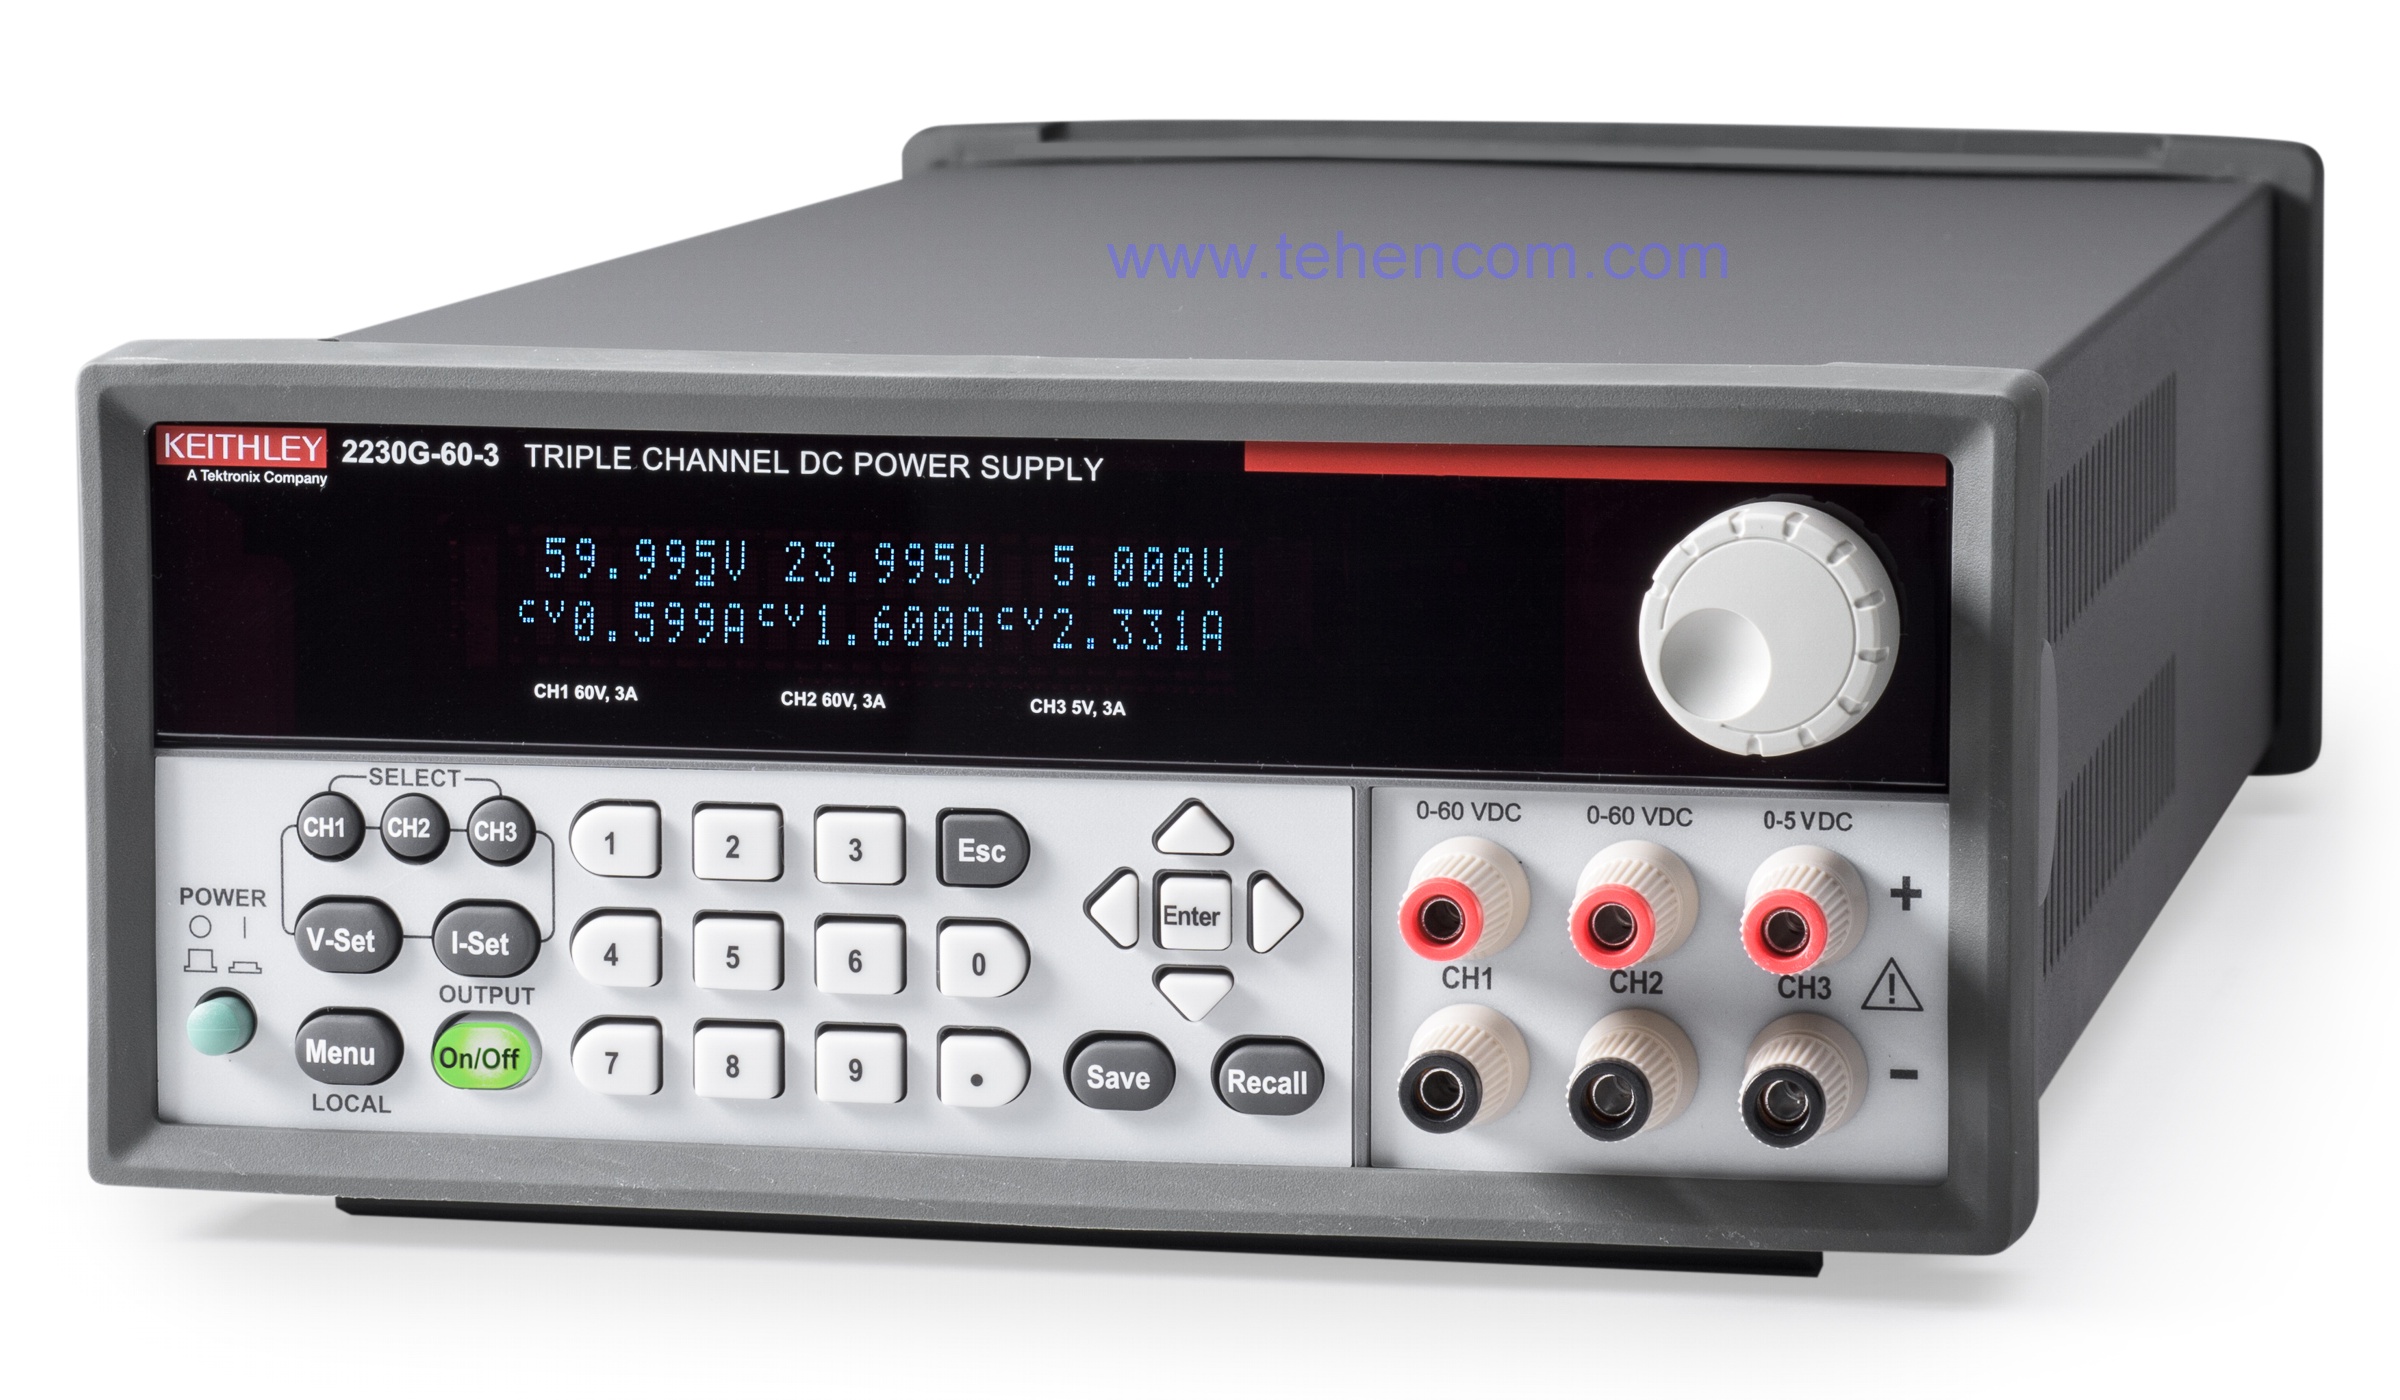 Keithley 2230-60-3